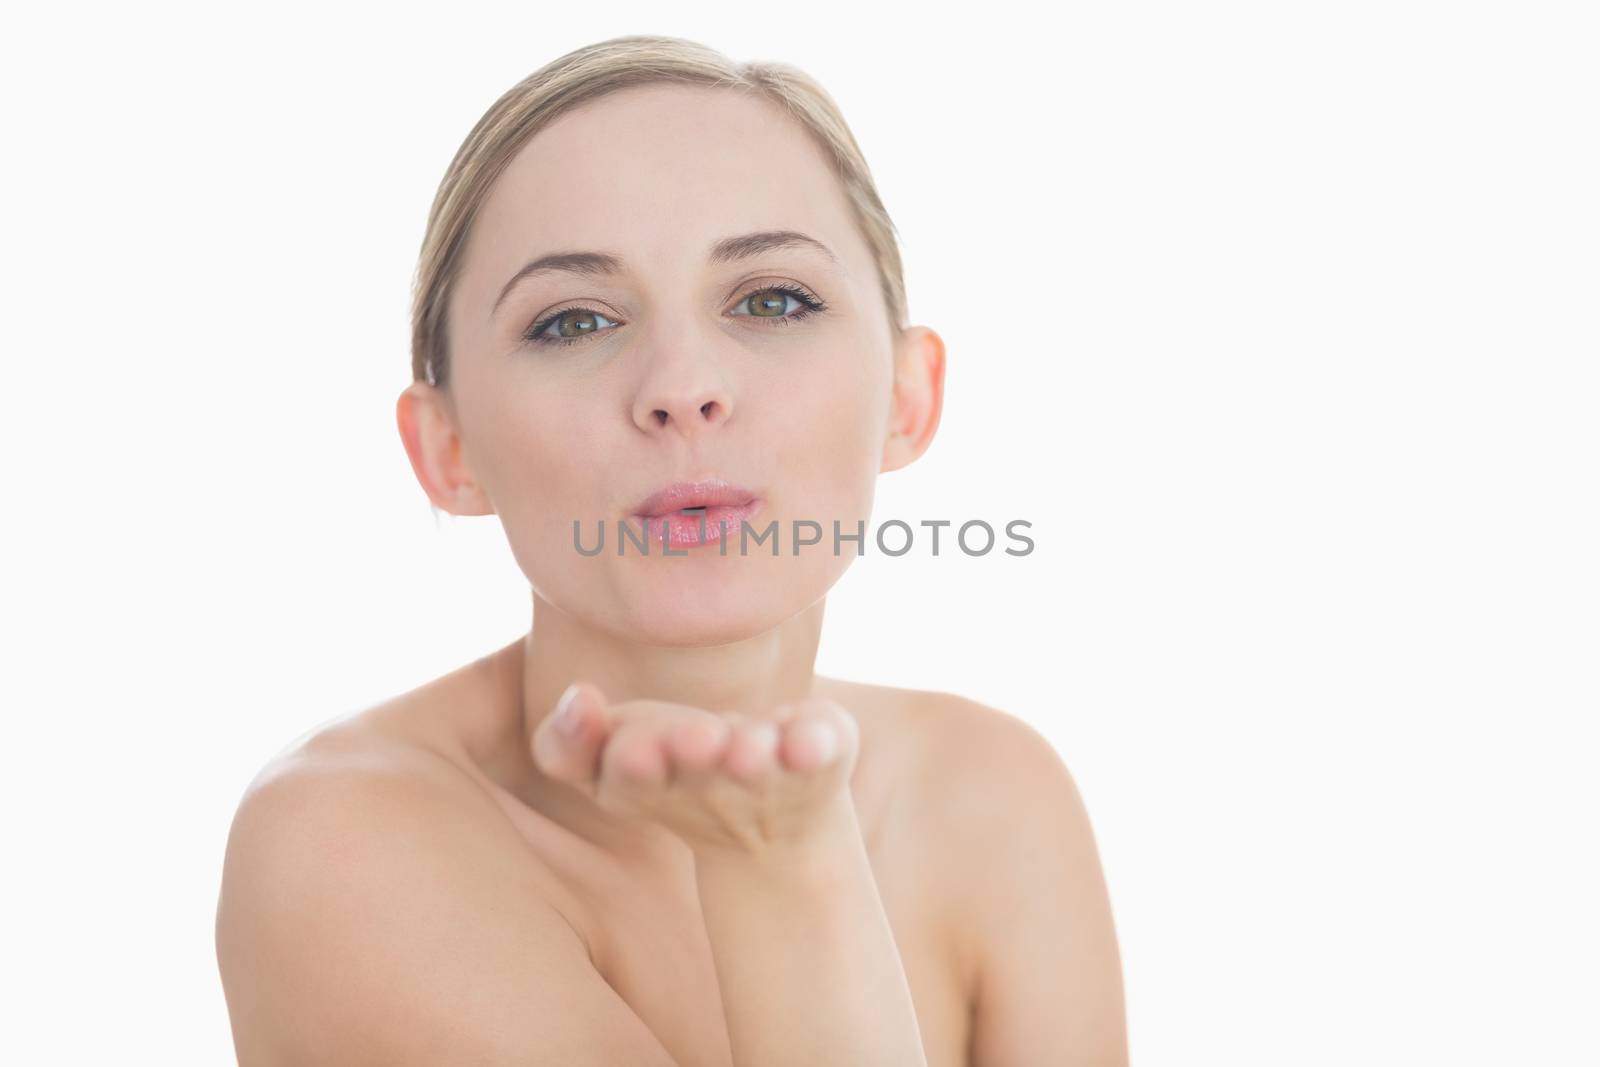 Closeup of cute young woman blowing a kiss over white background